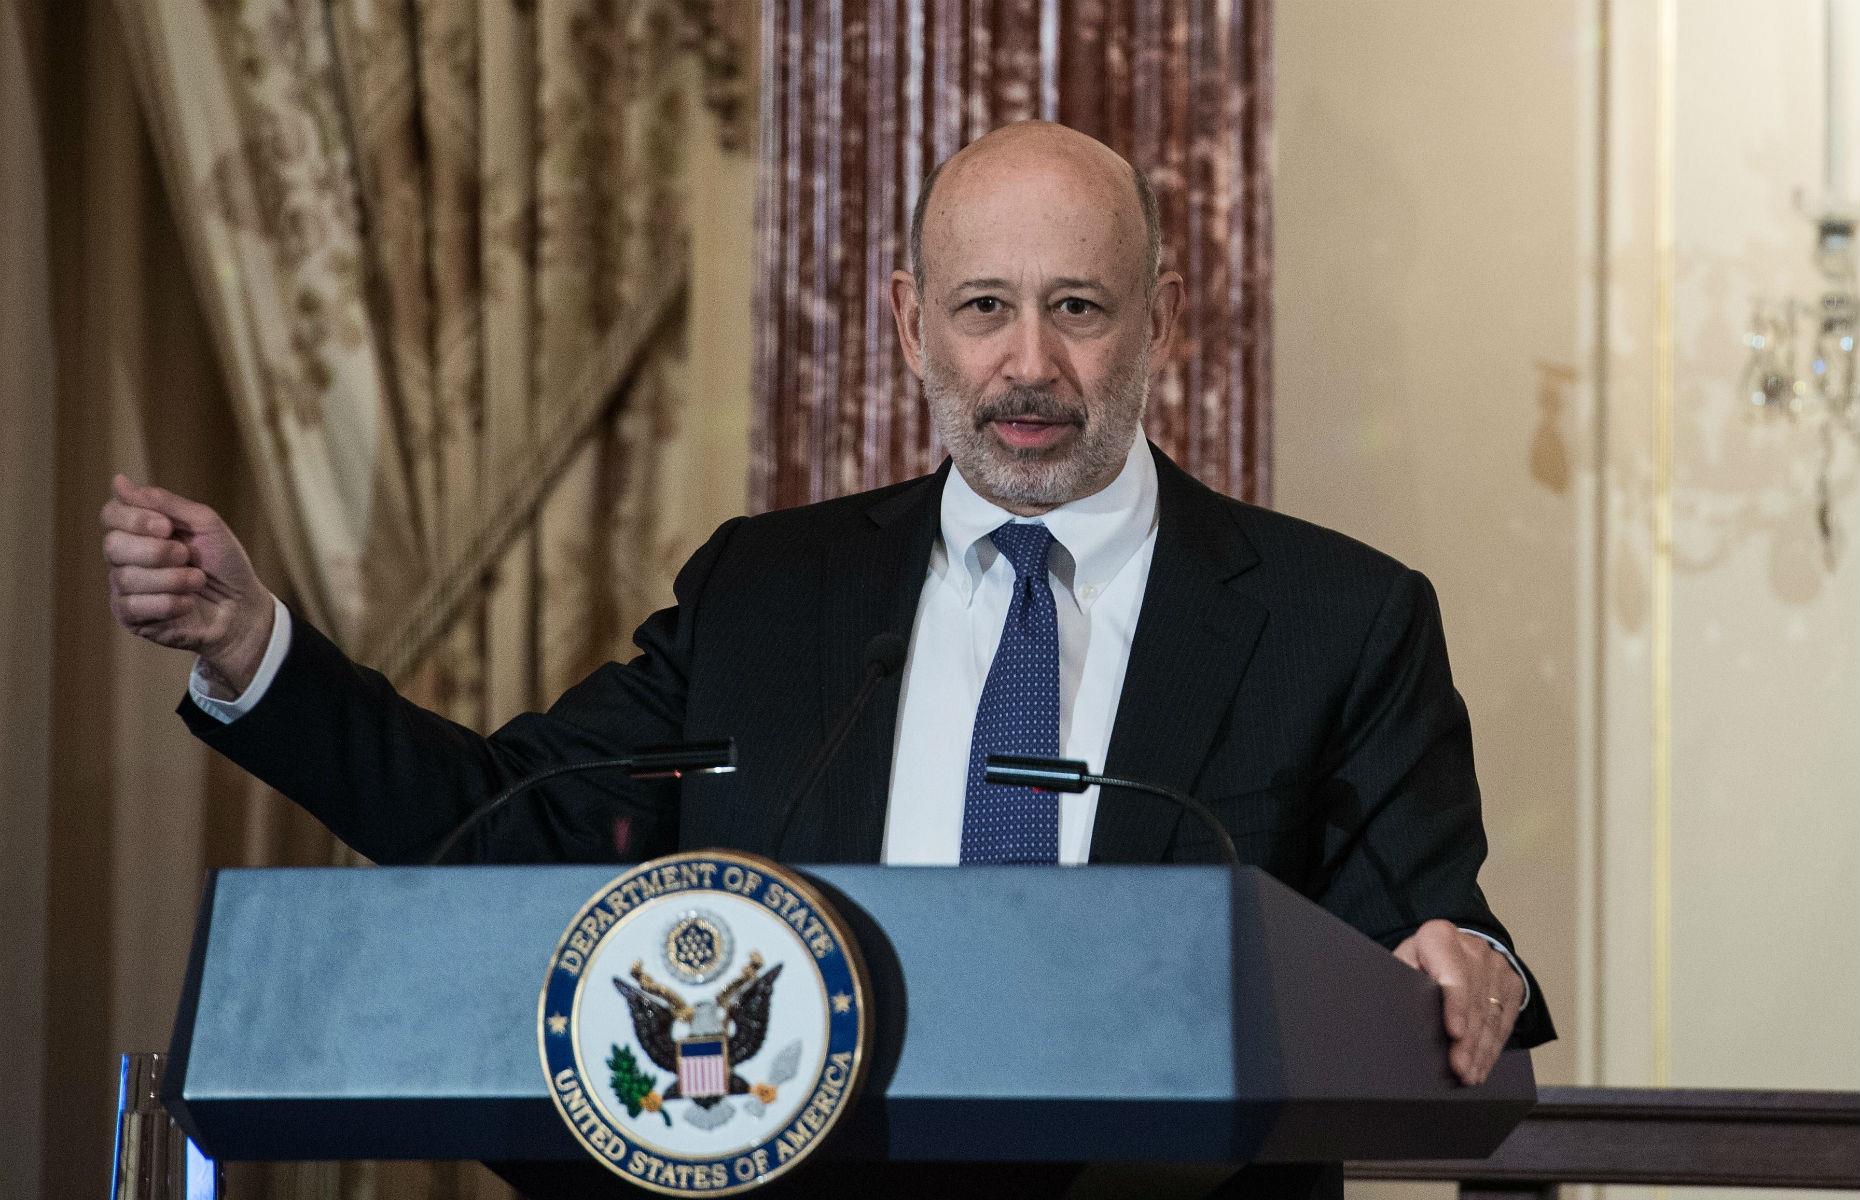 Lloyd Blankfein – Don’t be quick to give your opinions